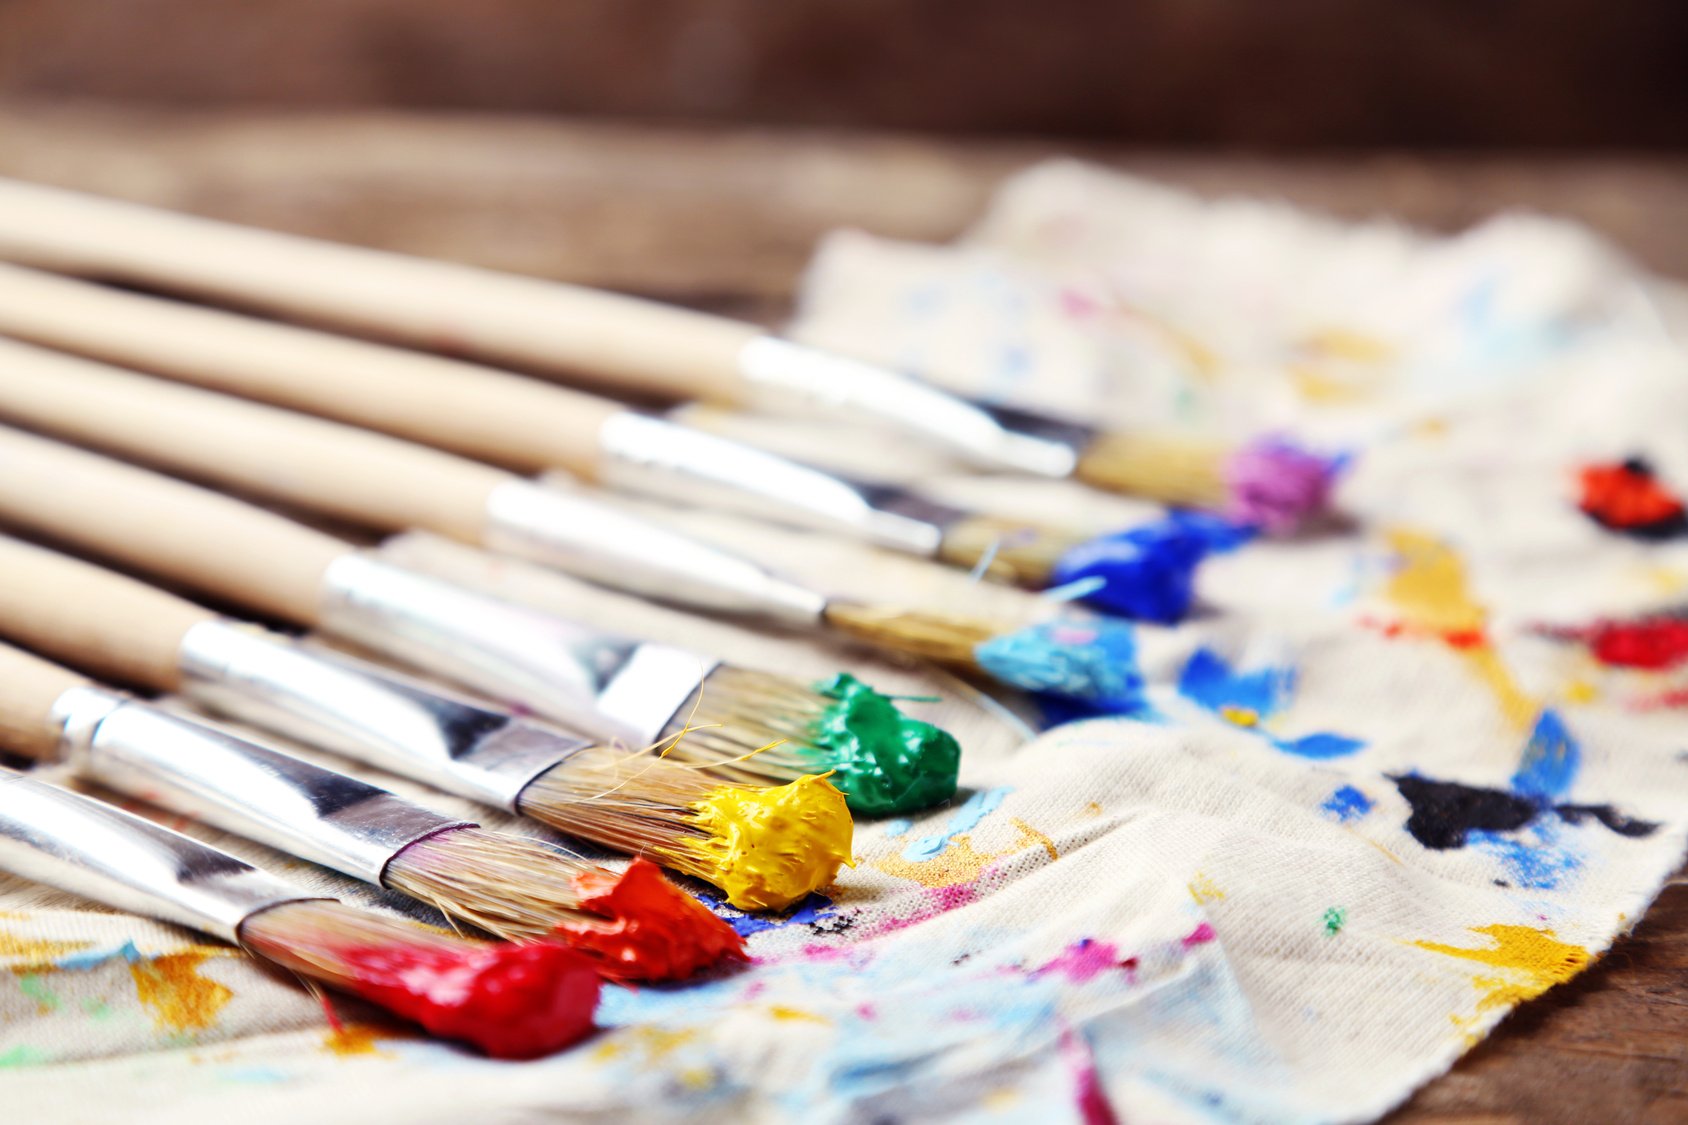 Brushes with colorful paints on dirty cloth